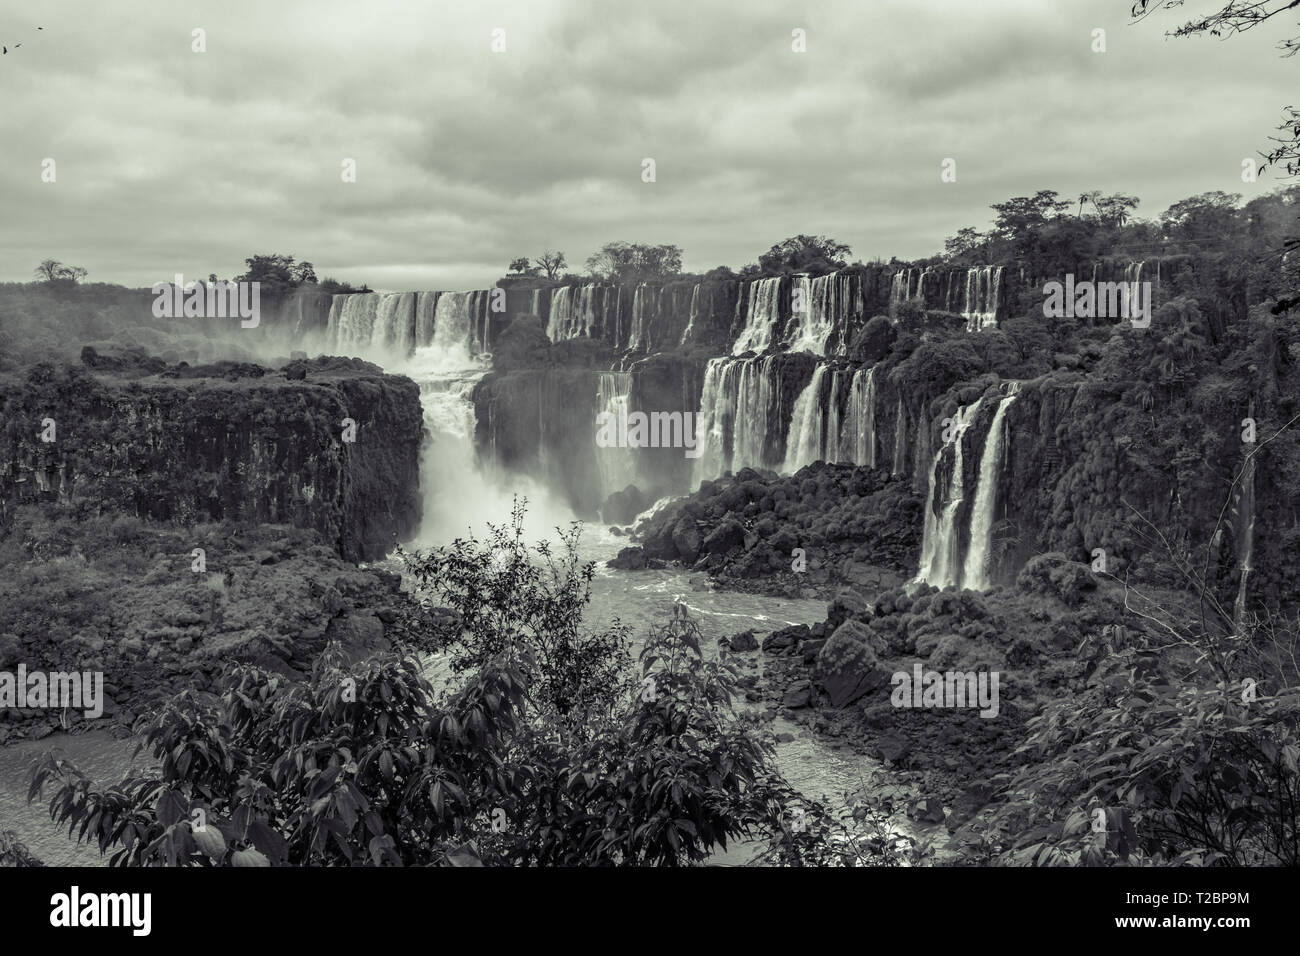 Iguazú Falls are waterfalls of the Iguazu River on the border of the Argentine province of Misiones and the Brazilian state of Paraná. Stock Photo